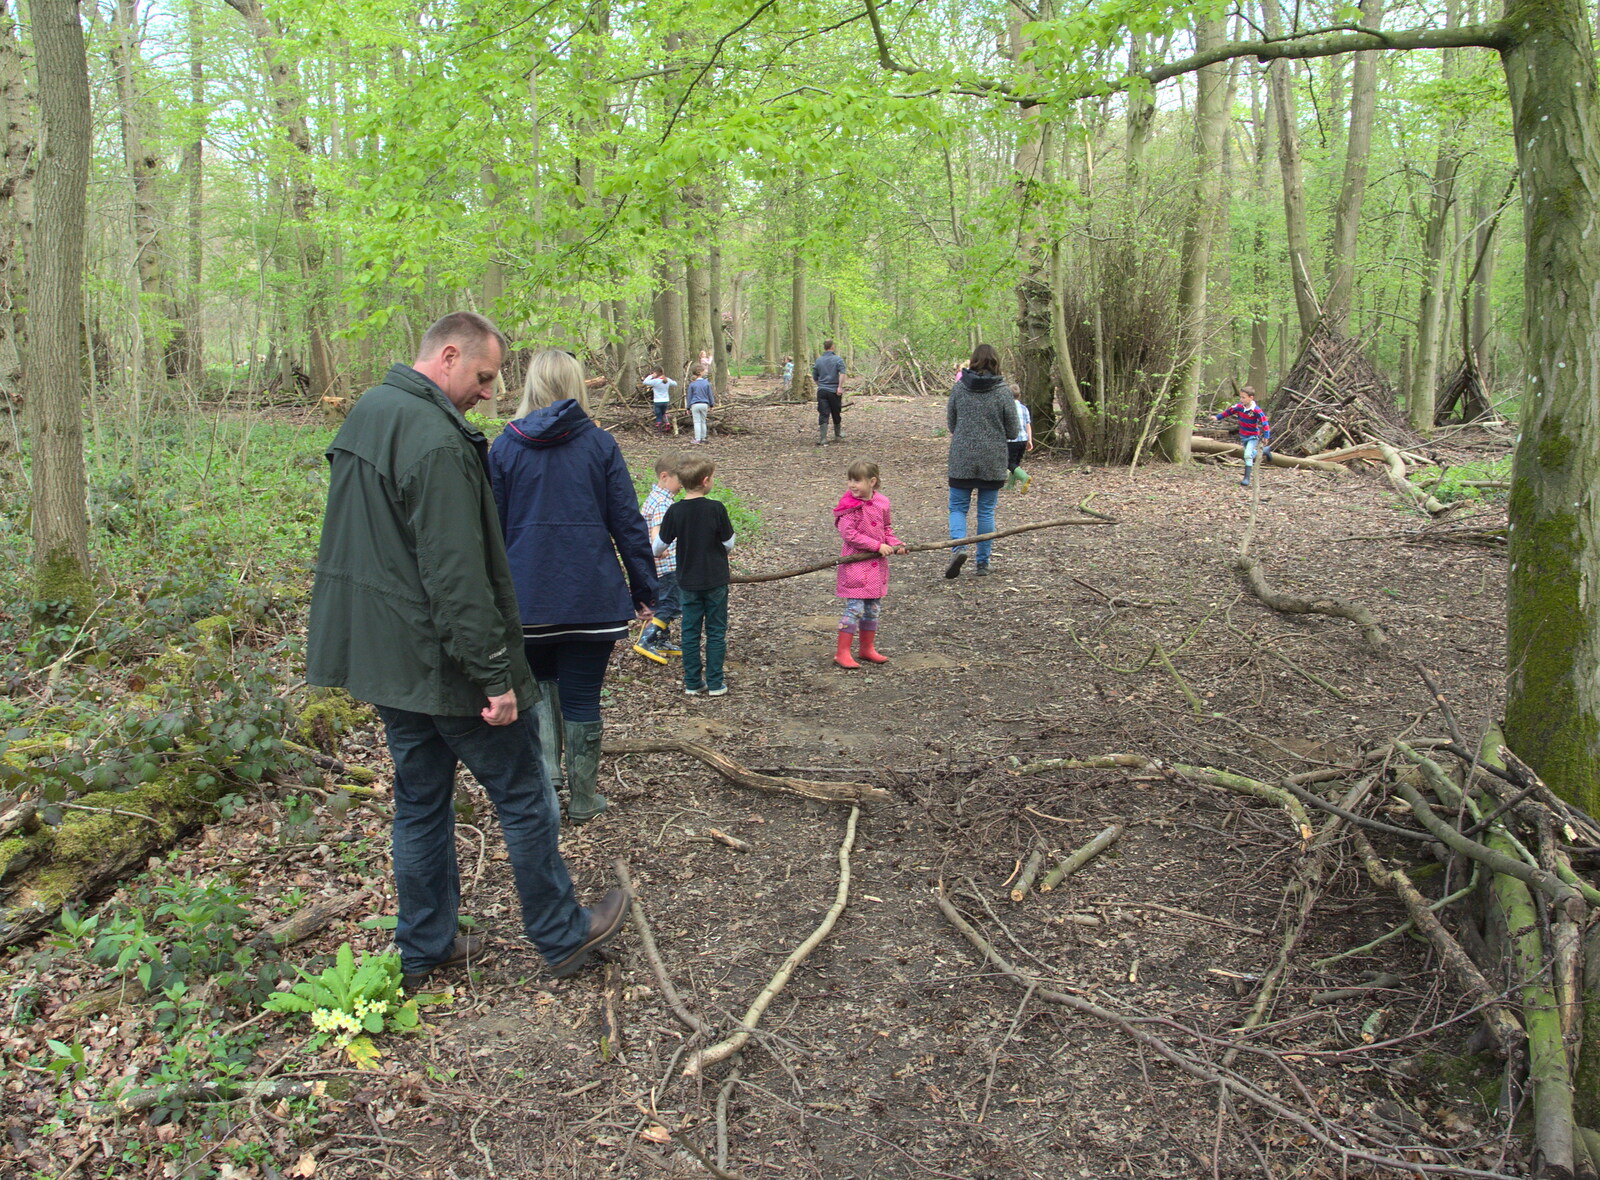 We move into the woods from Making Dens: Rosie's Birthday, Thornham, Suffolk - 25th April 2015